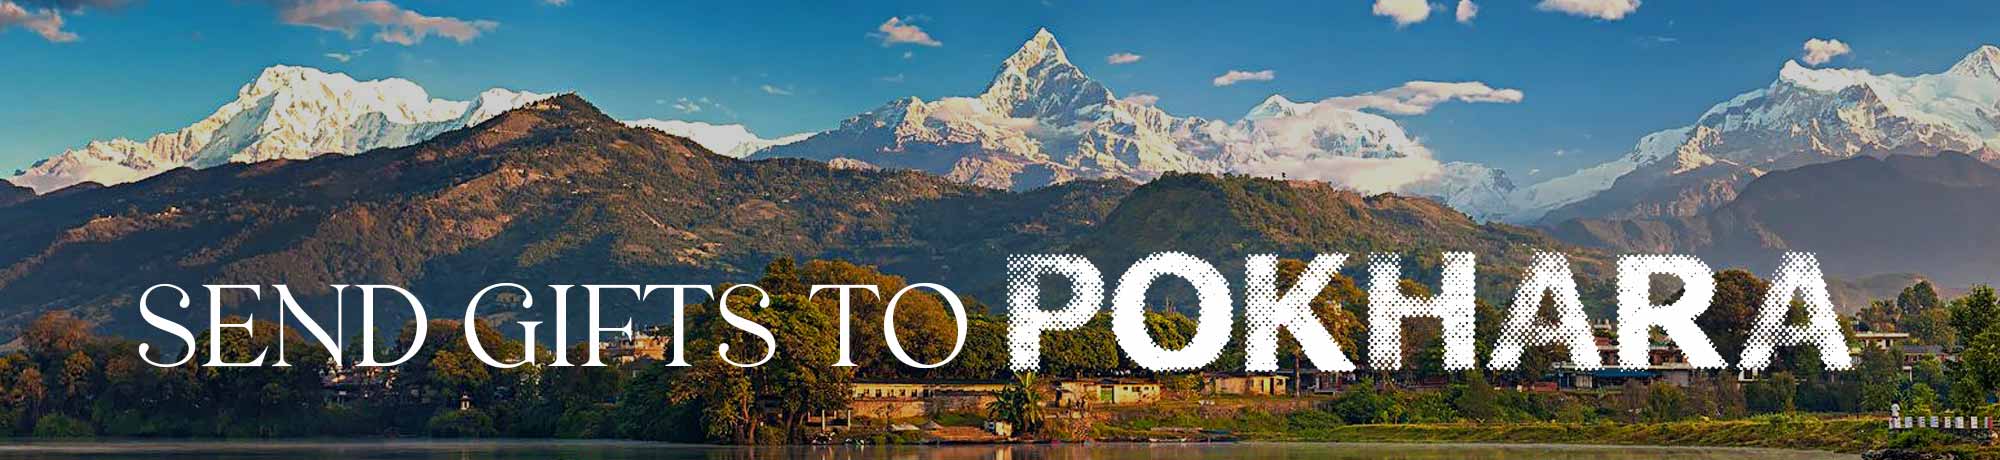 Send gifts to Pokhara